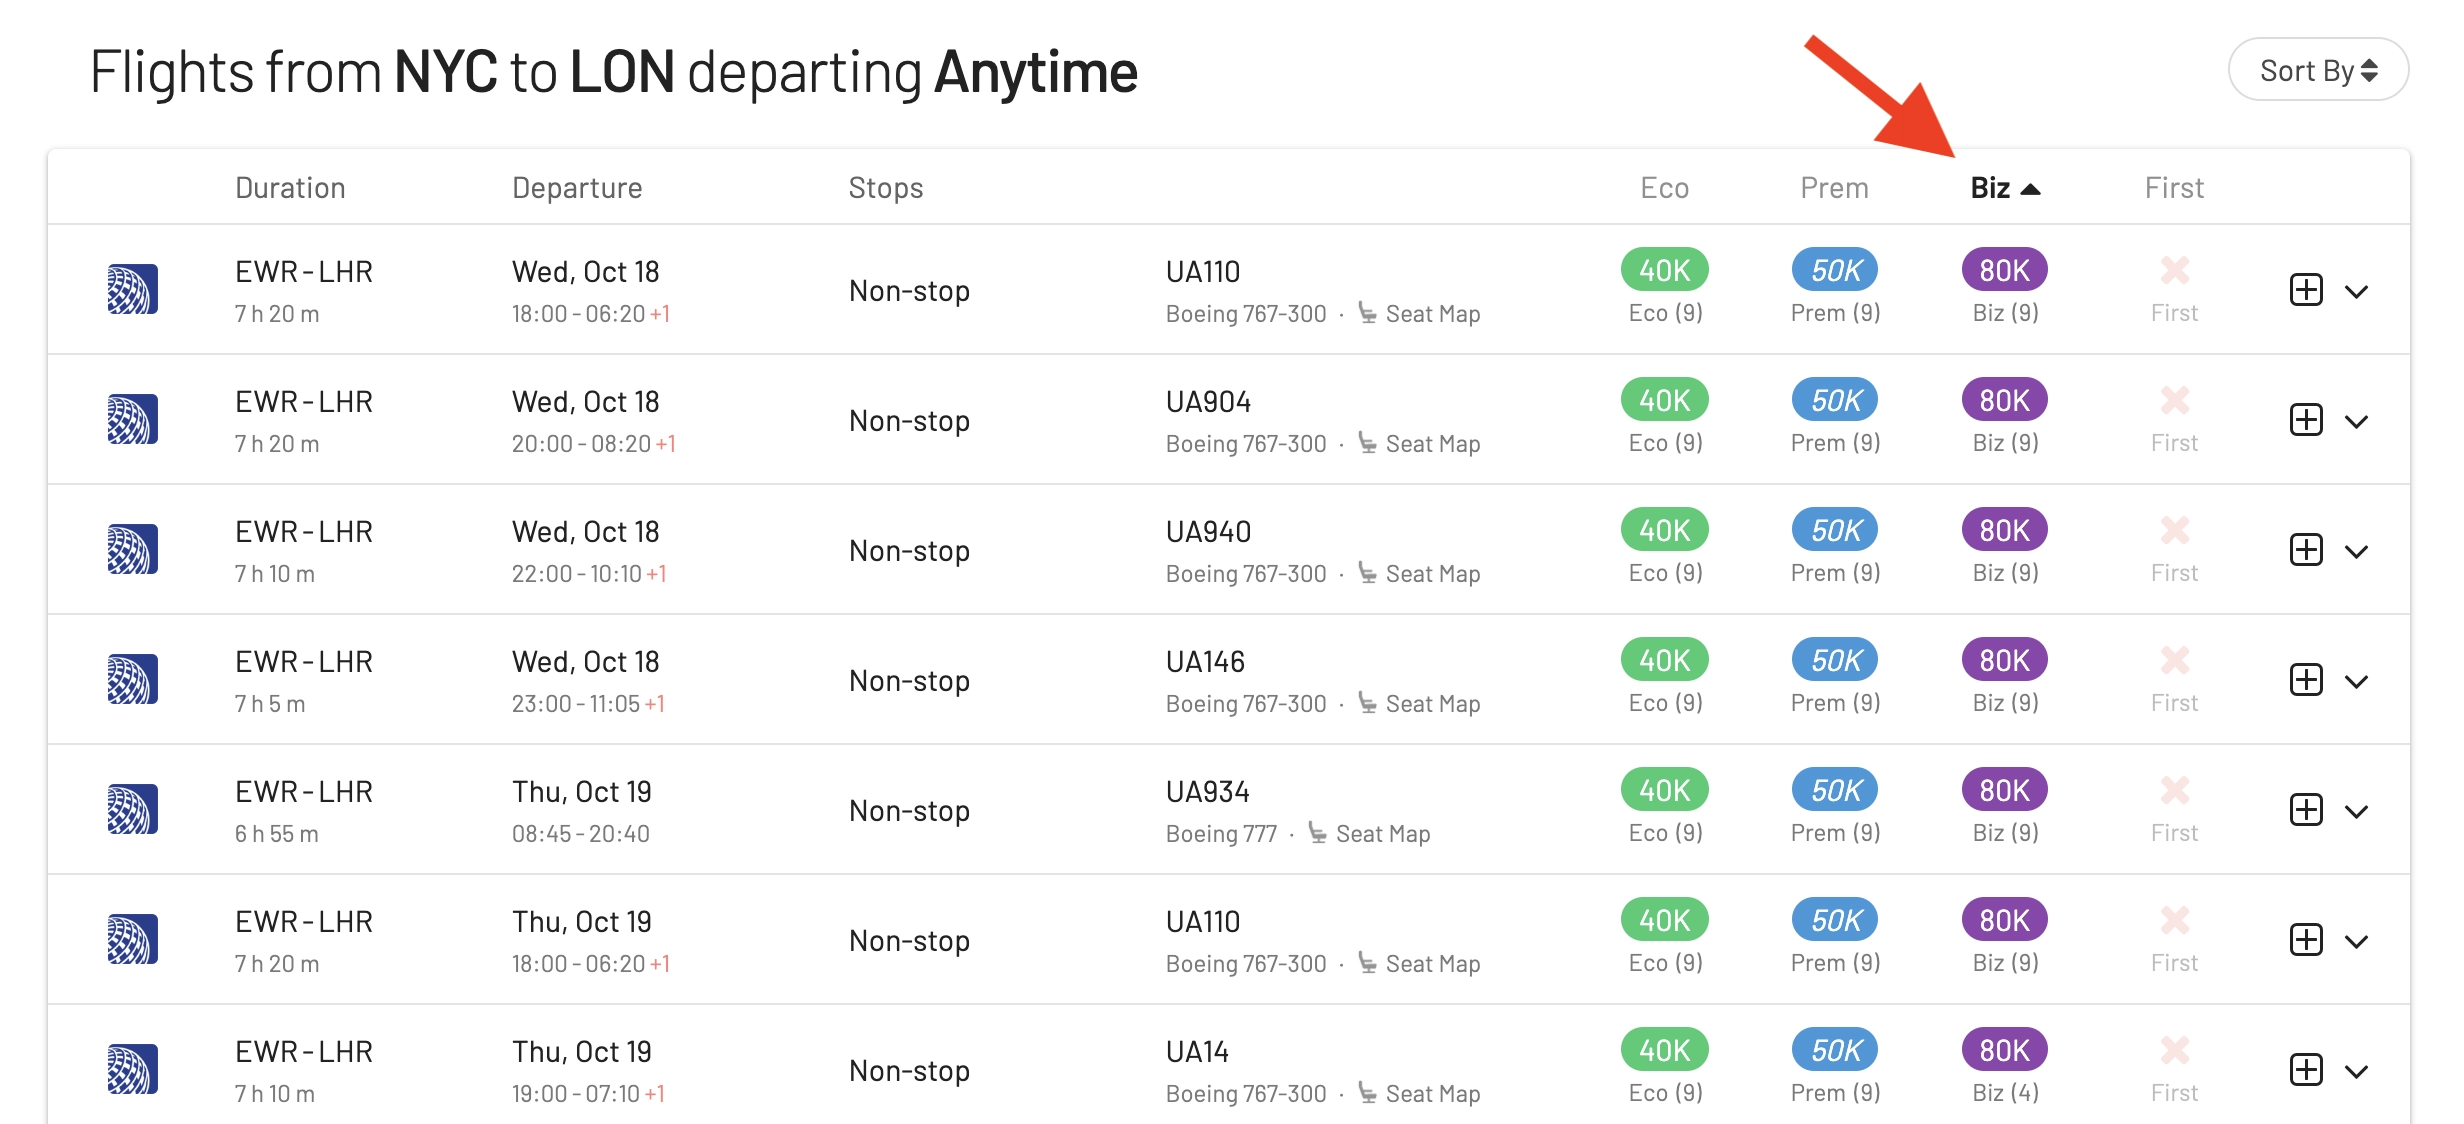 How to find cheaps award flight using AwardFares.